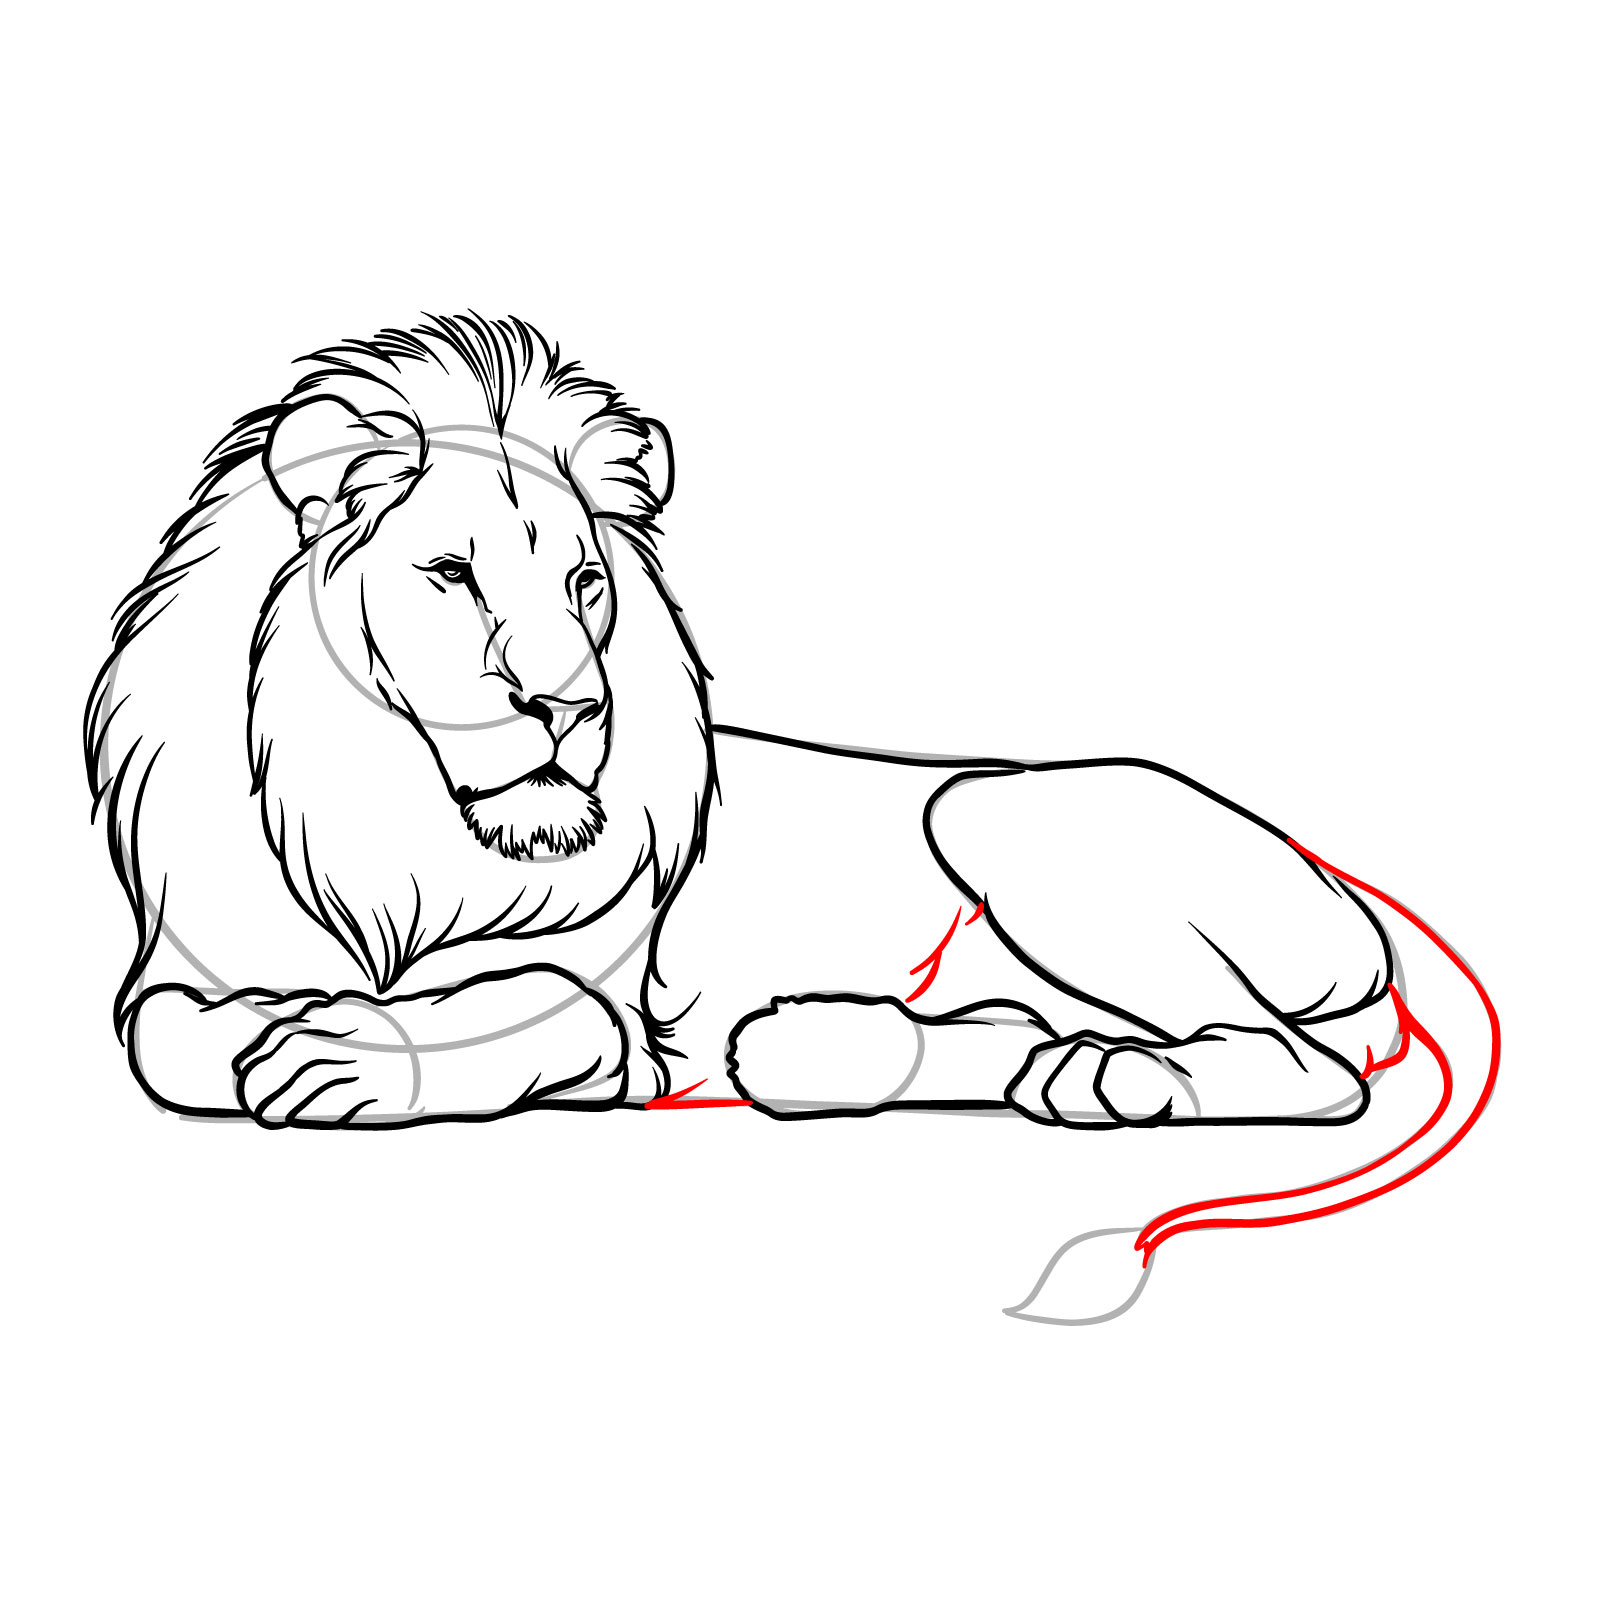 Lying lion drawing - Step 14: Sketching the body and adding the tail